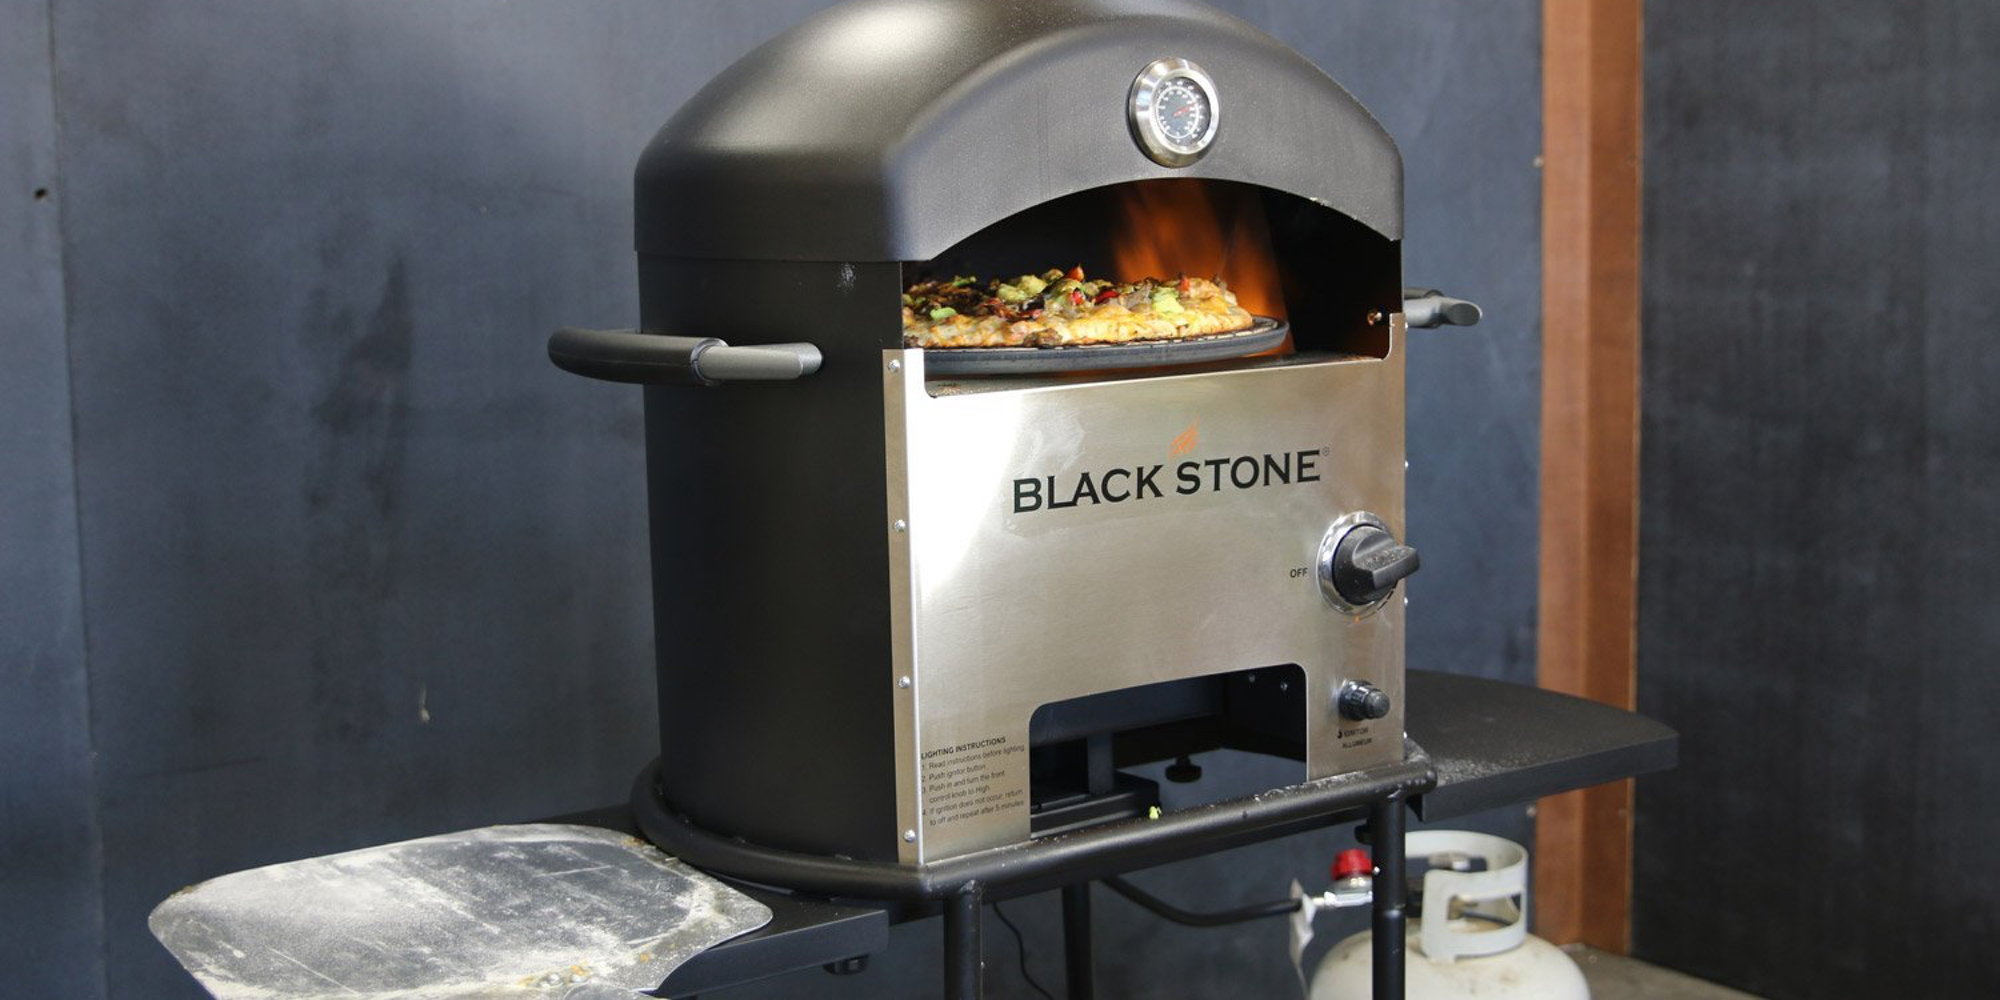 Blackstone's Outdoor Pizza Oven is on sale for 191 (Reg. 248)